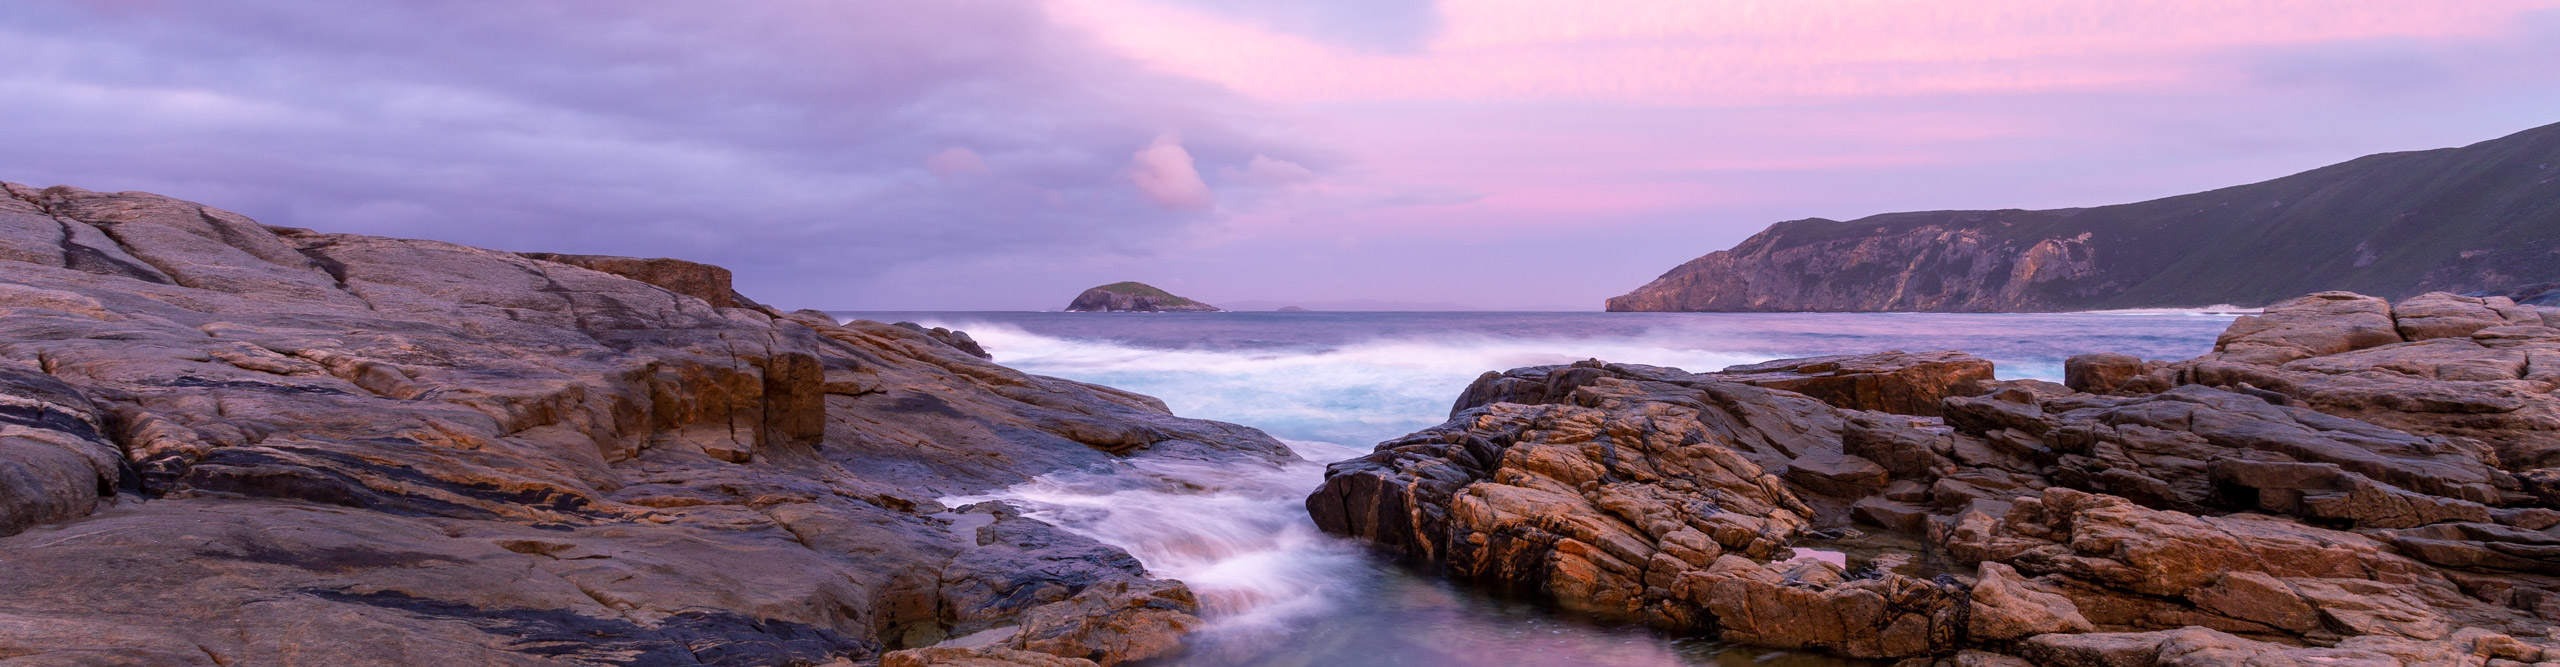 Sunrise at the Gap, with pink fluffy clouds and blue water, Albany, Western Australia 